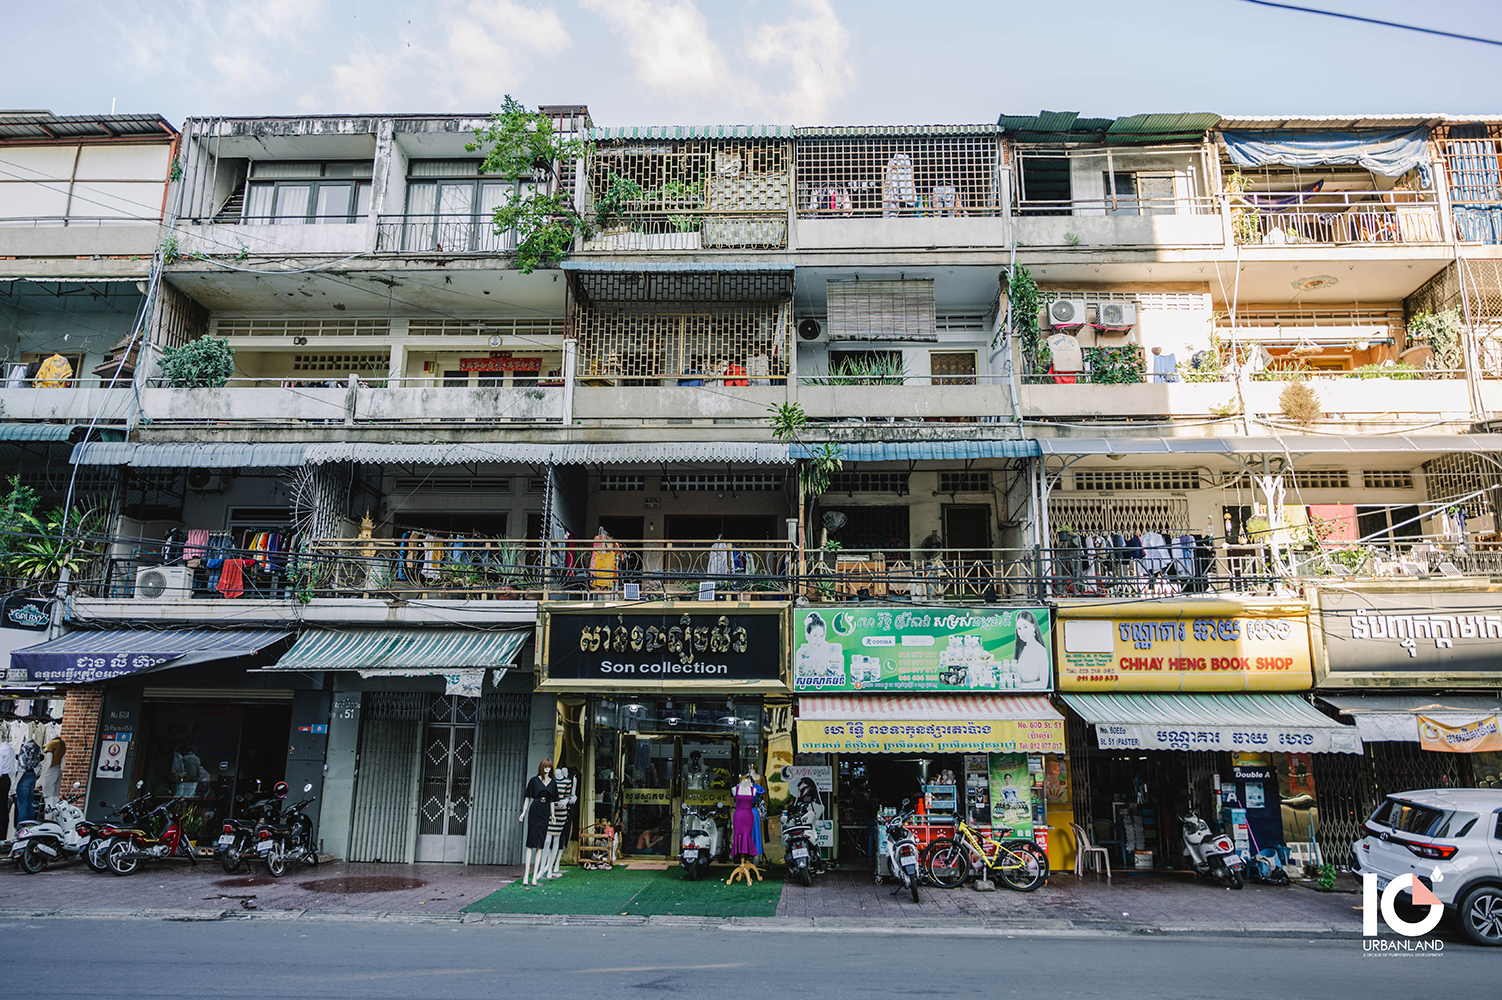 Old shophouses in Central Market area